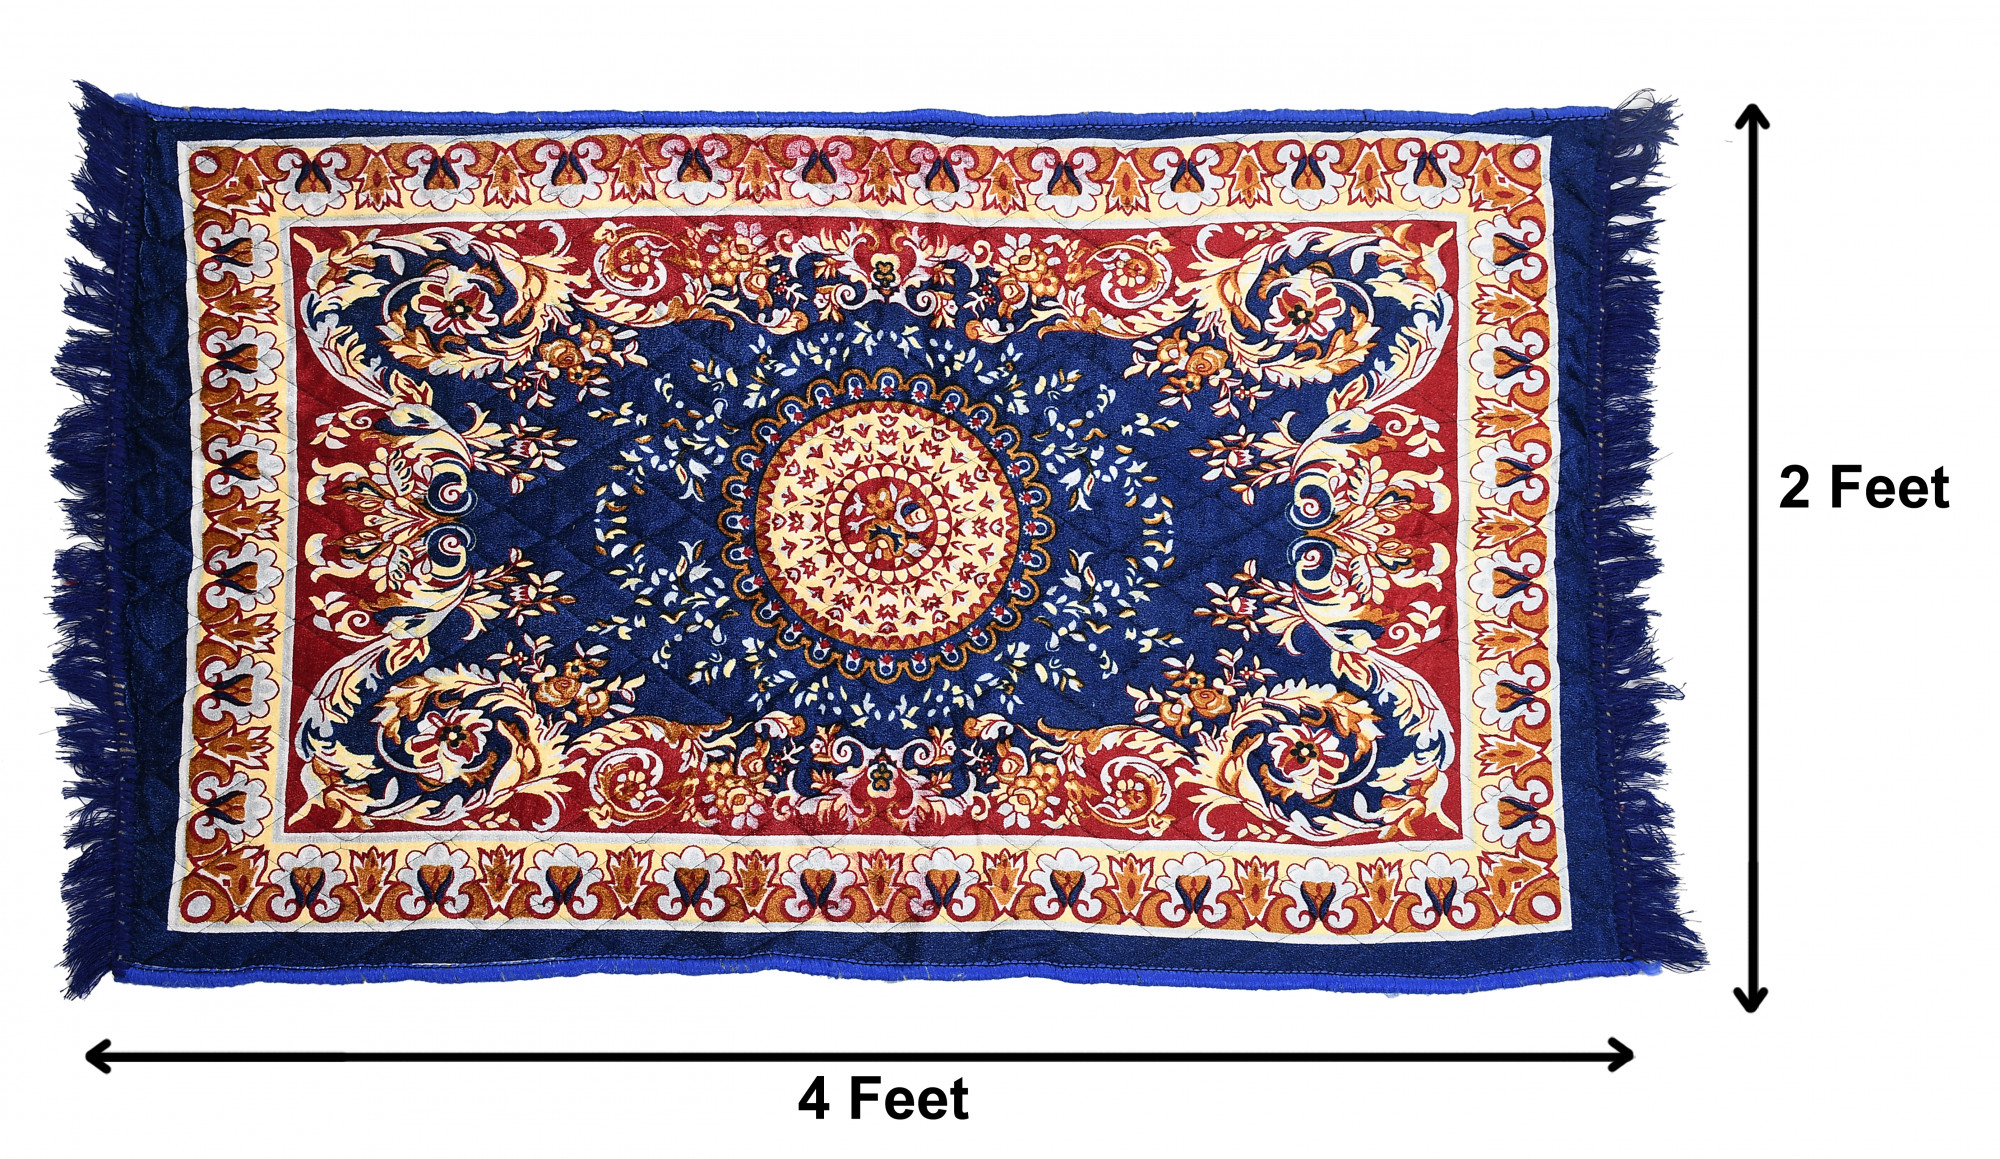 Kuber Industries Super Soft Area Rugs Silky Smooth Bedroom Mats for Living Room Kids Room Baby Room Dormitory Home Decor Carpet-4 x 2 Feet (Blue)